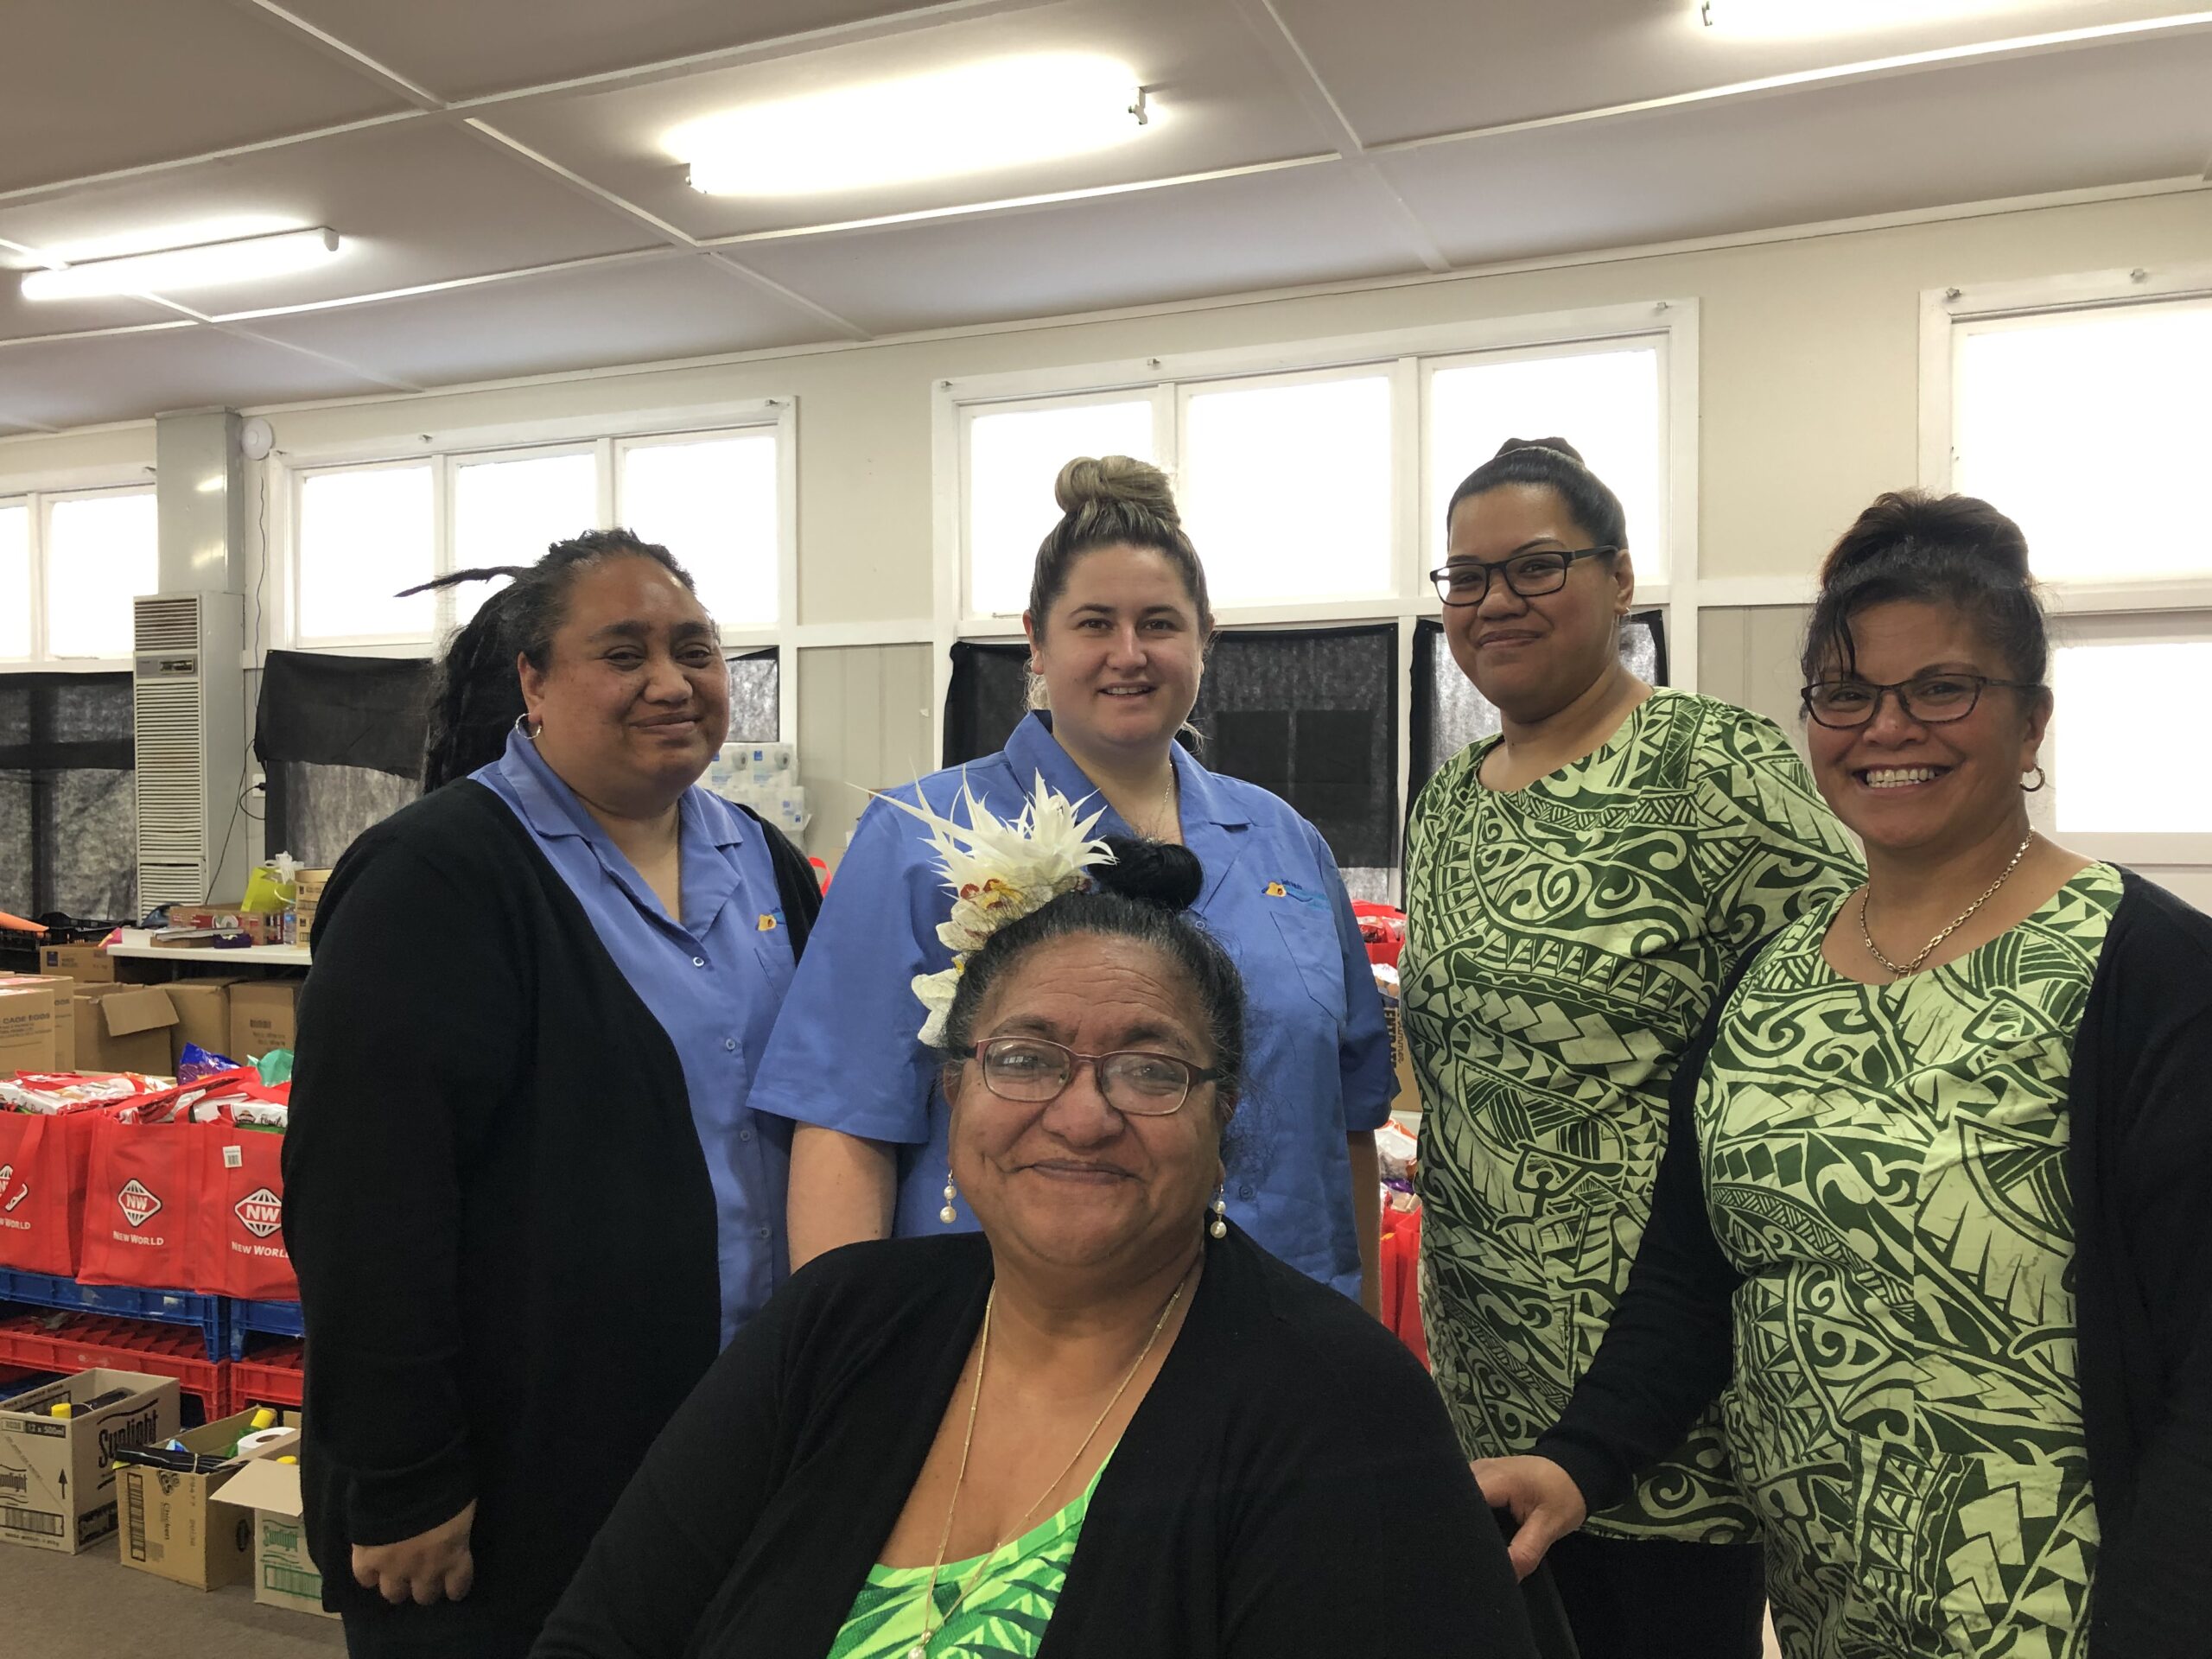 Smiling staff from South Waikato Pacific Islands Community Services Trust.